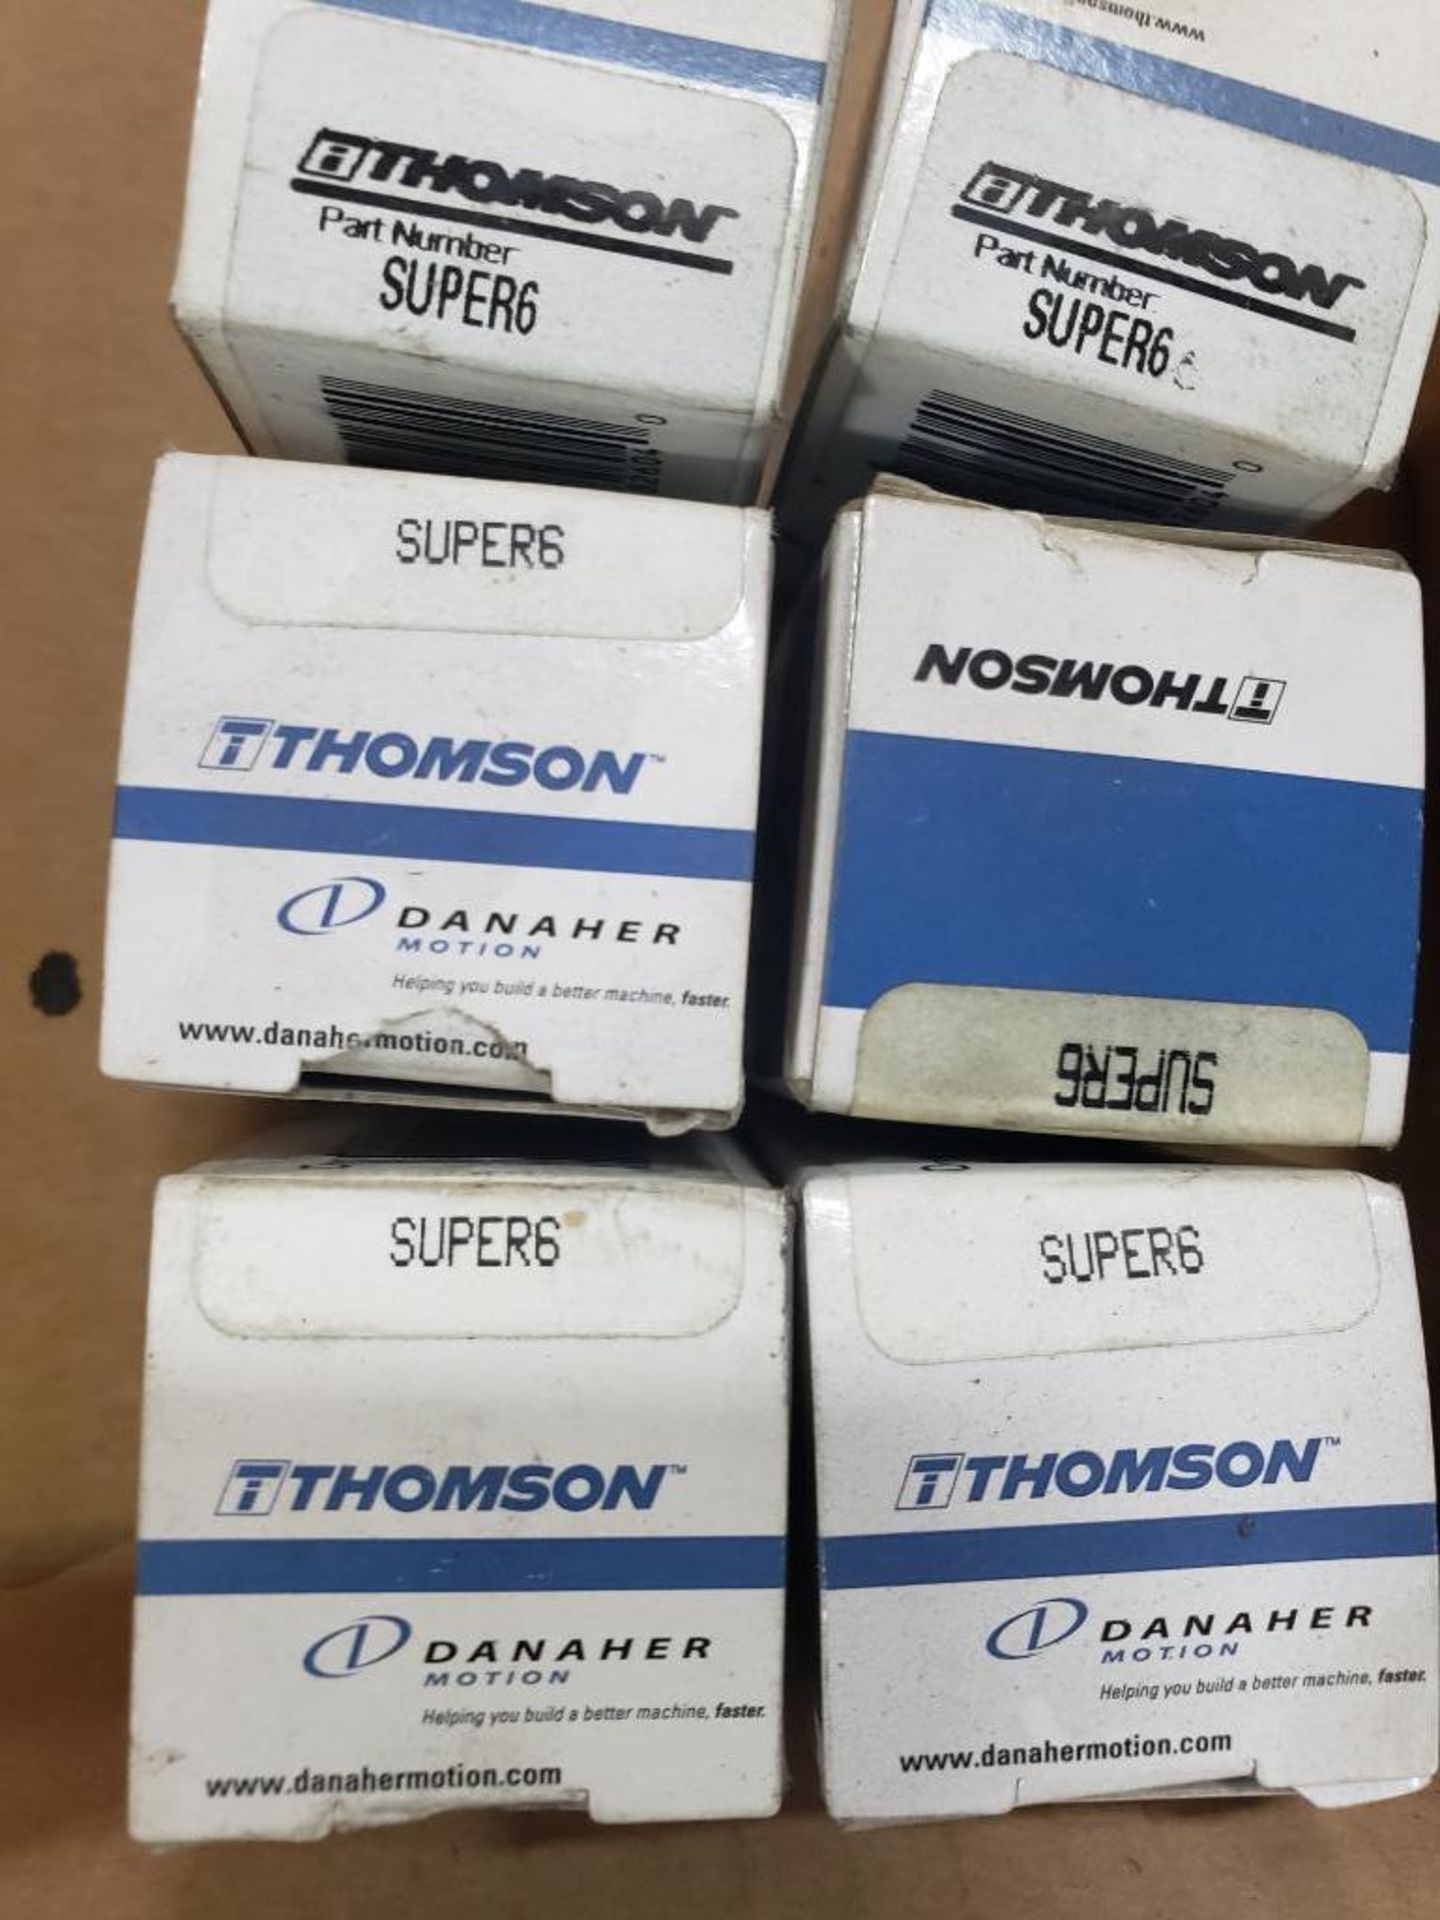 Qty 6 - Thomson bearing part number Super6. New in boxes. - Image 2 of 2